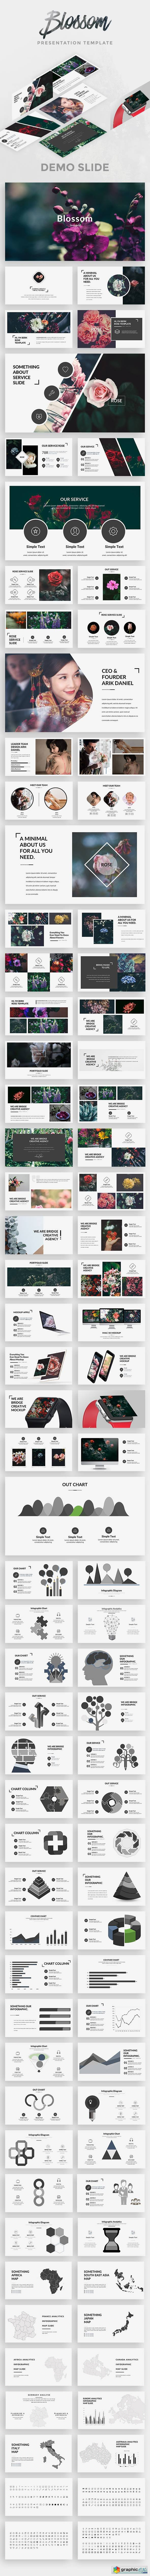 Blossom Creative Powerpoint Template